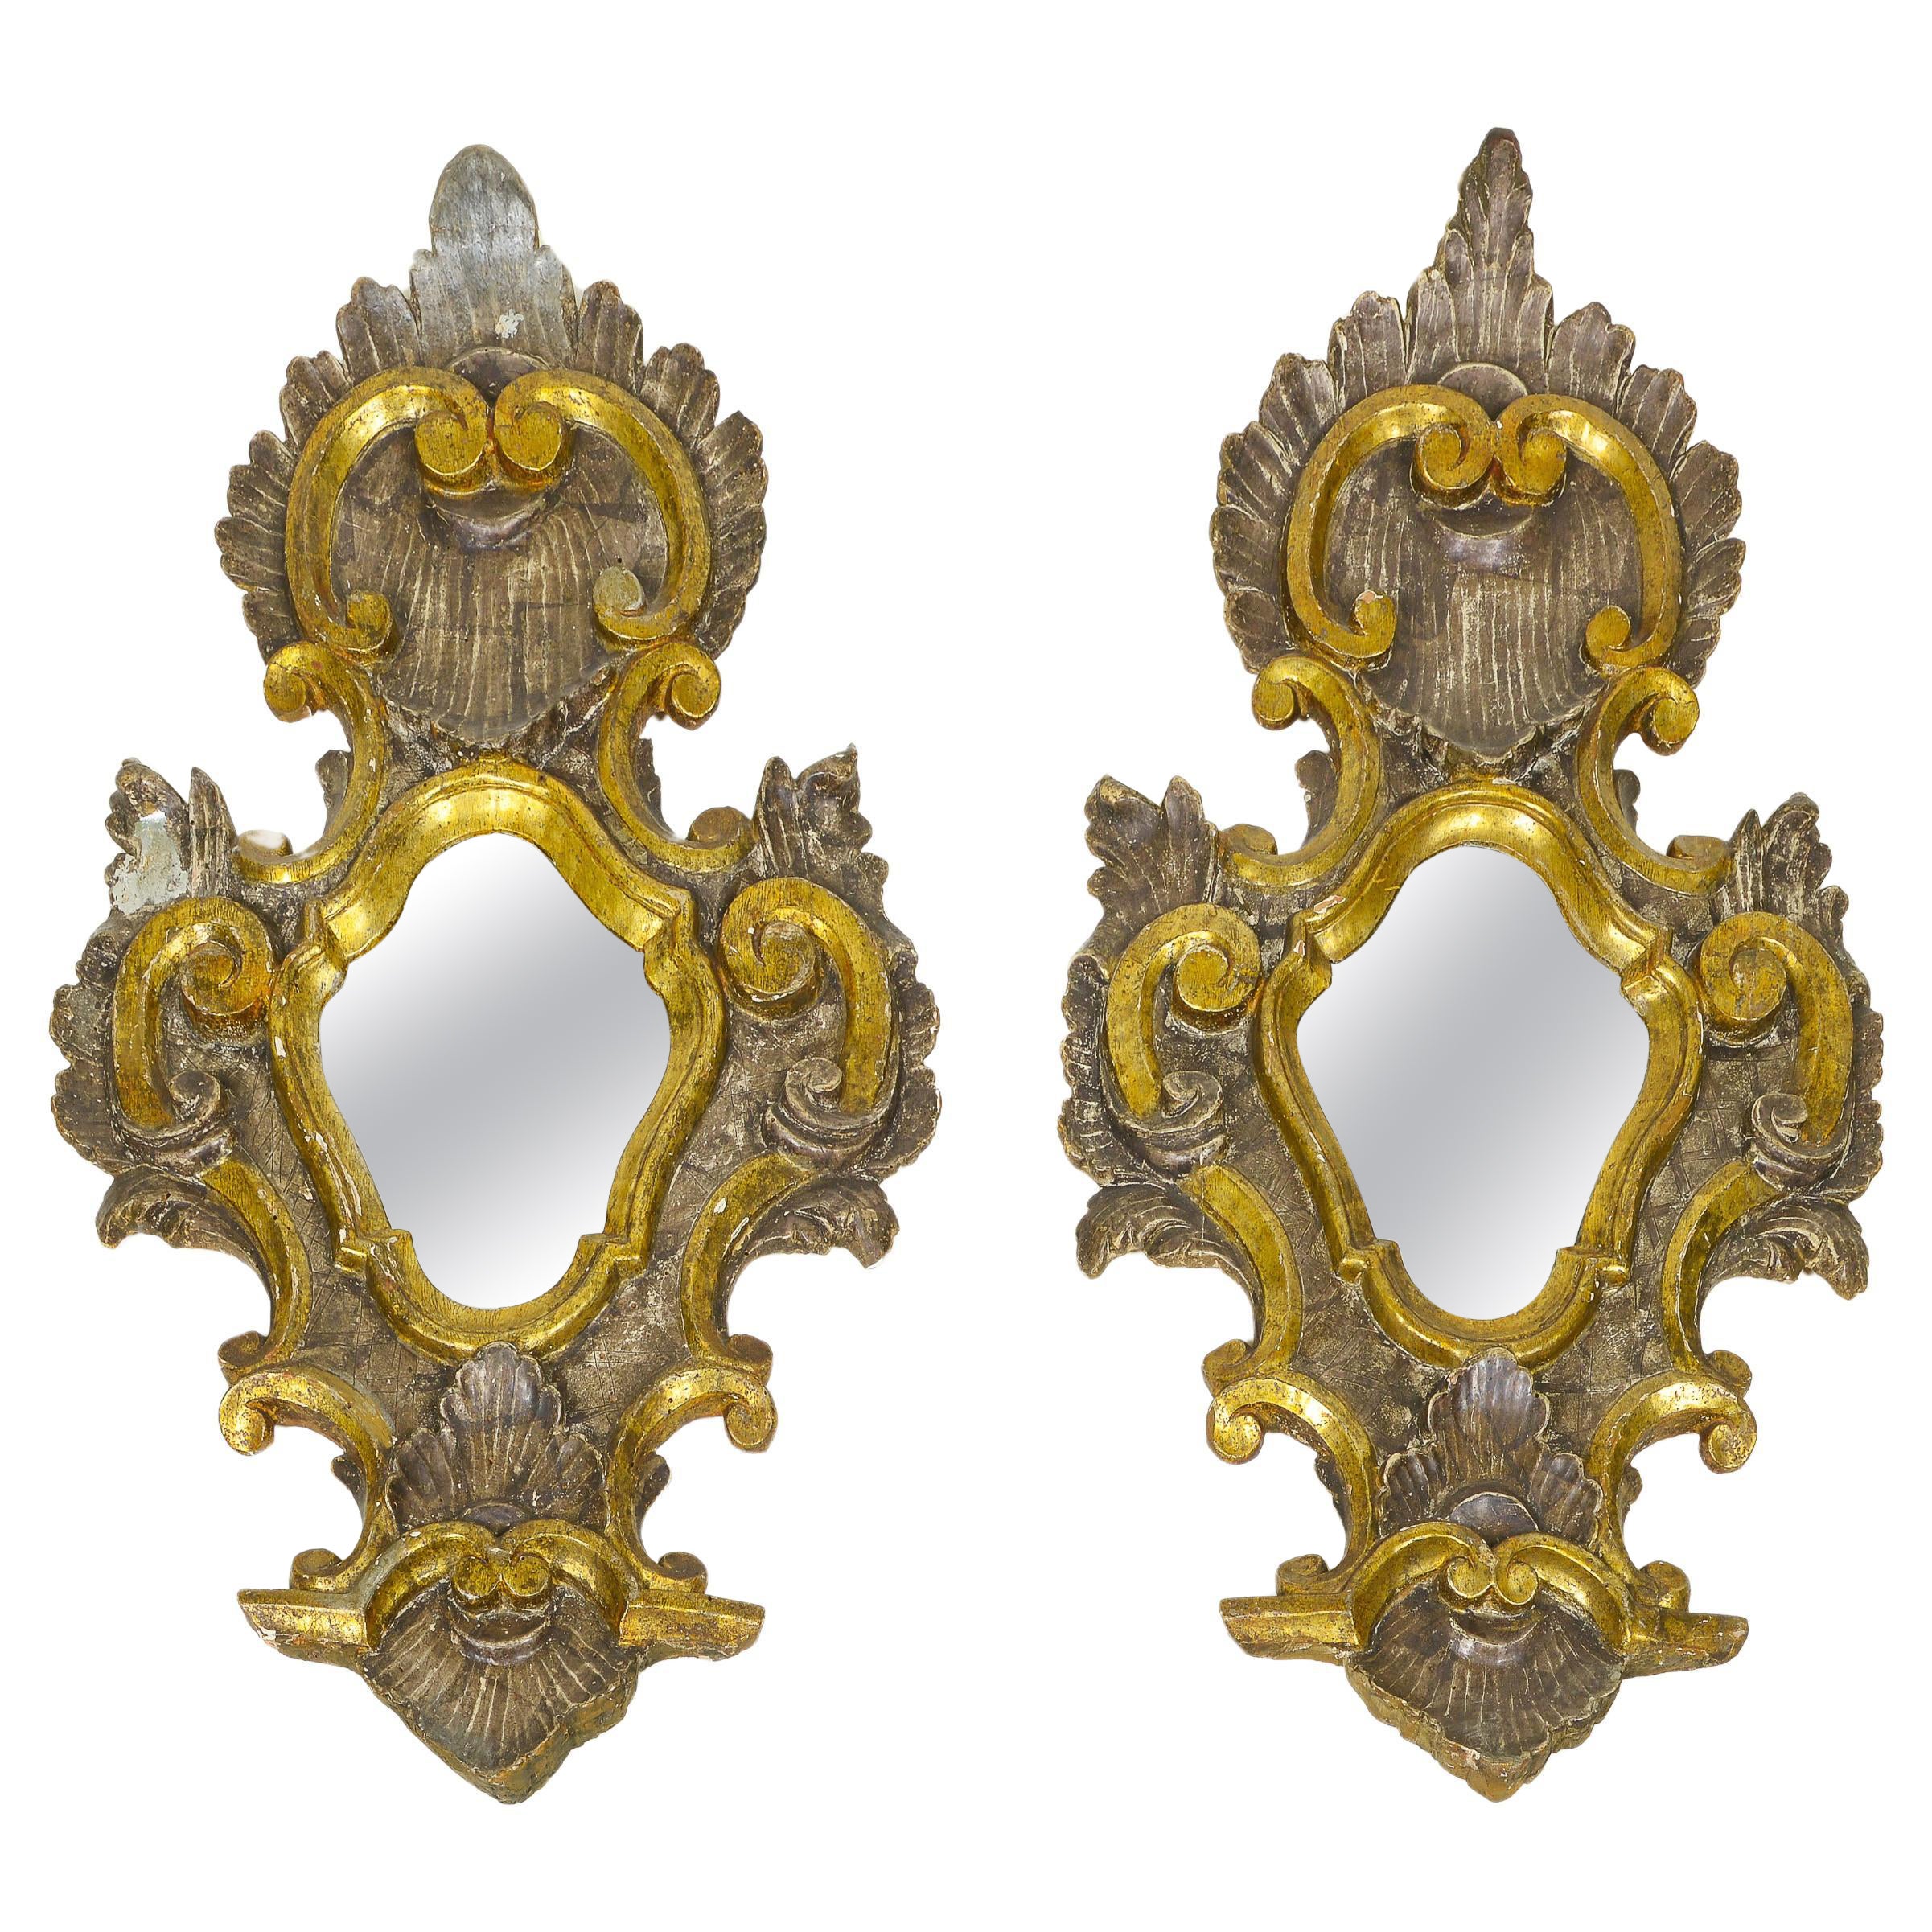 A Pair of Italian Painted and Parcel Gilt Girandoles